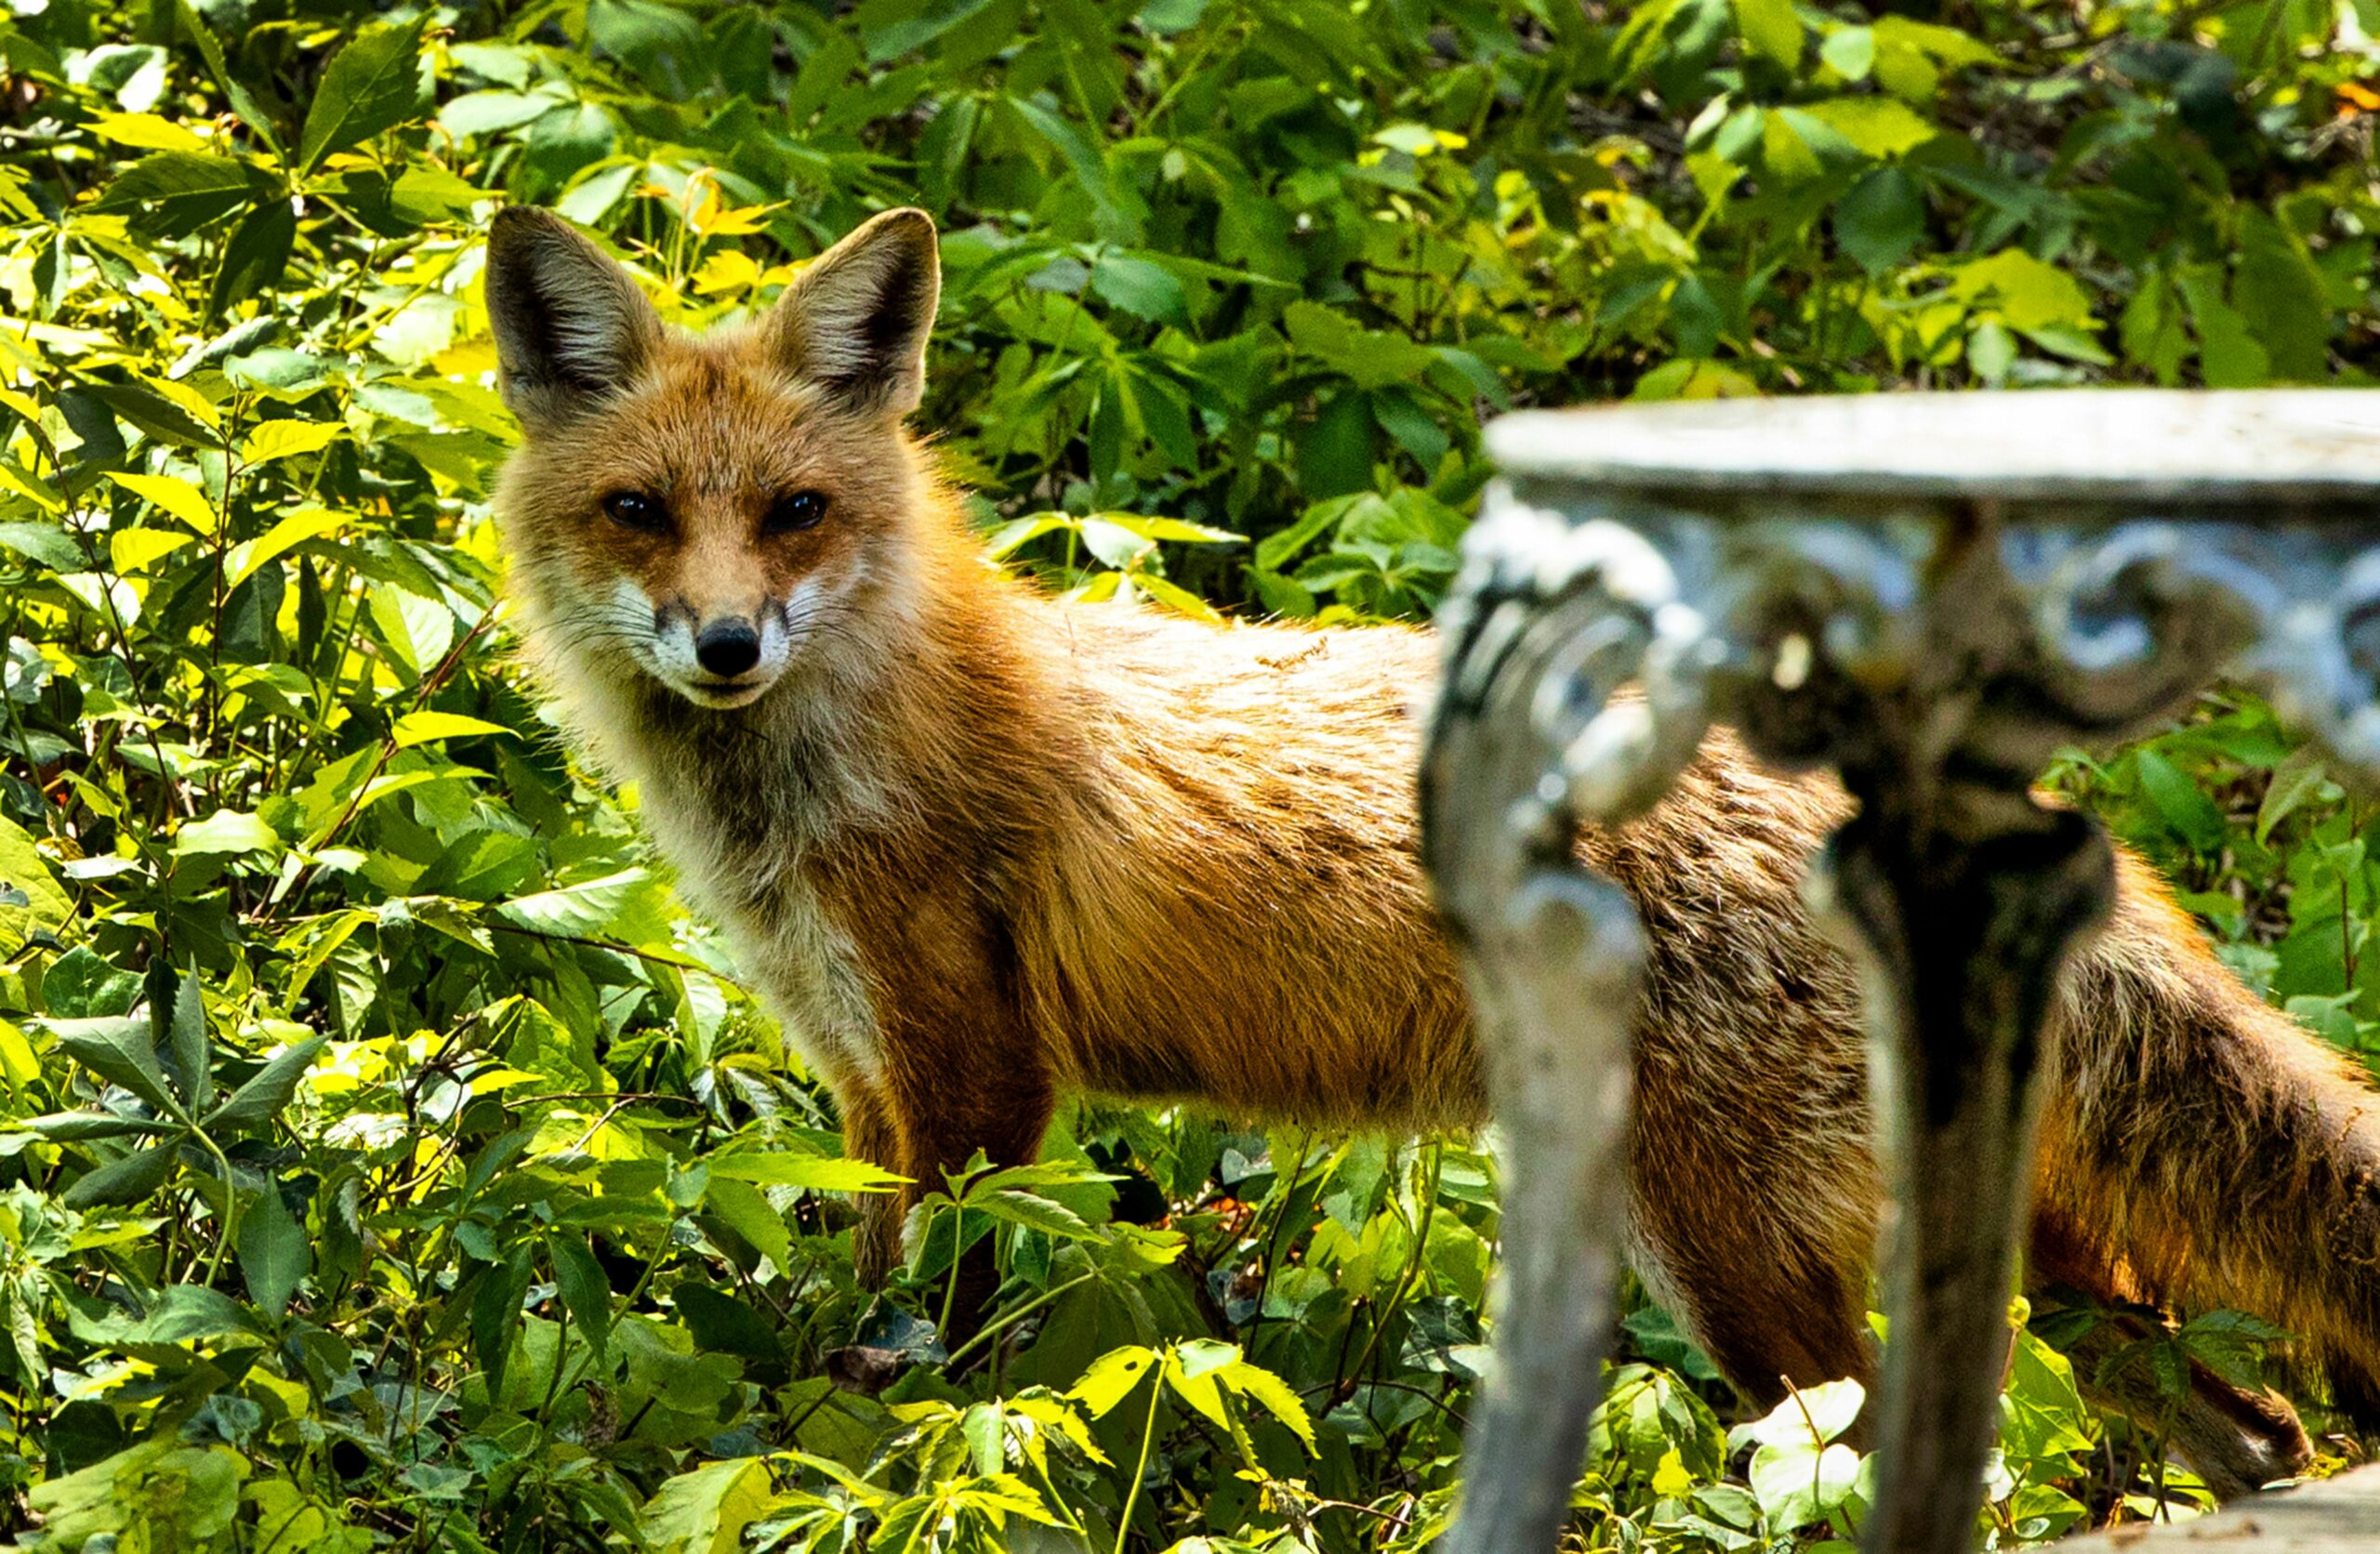 An alert red fox in a wild, natural habitat, with a rustic table in the foreground.